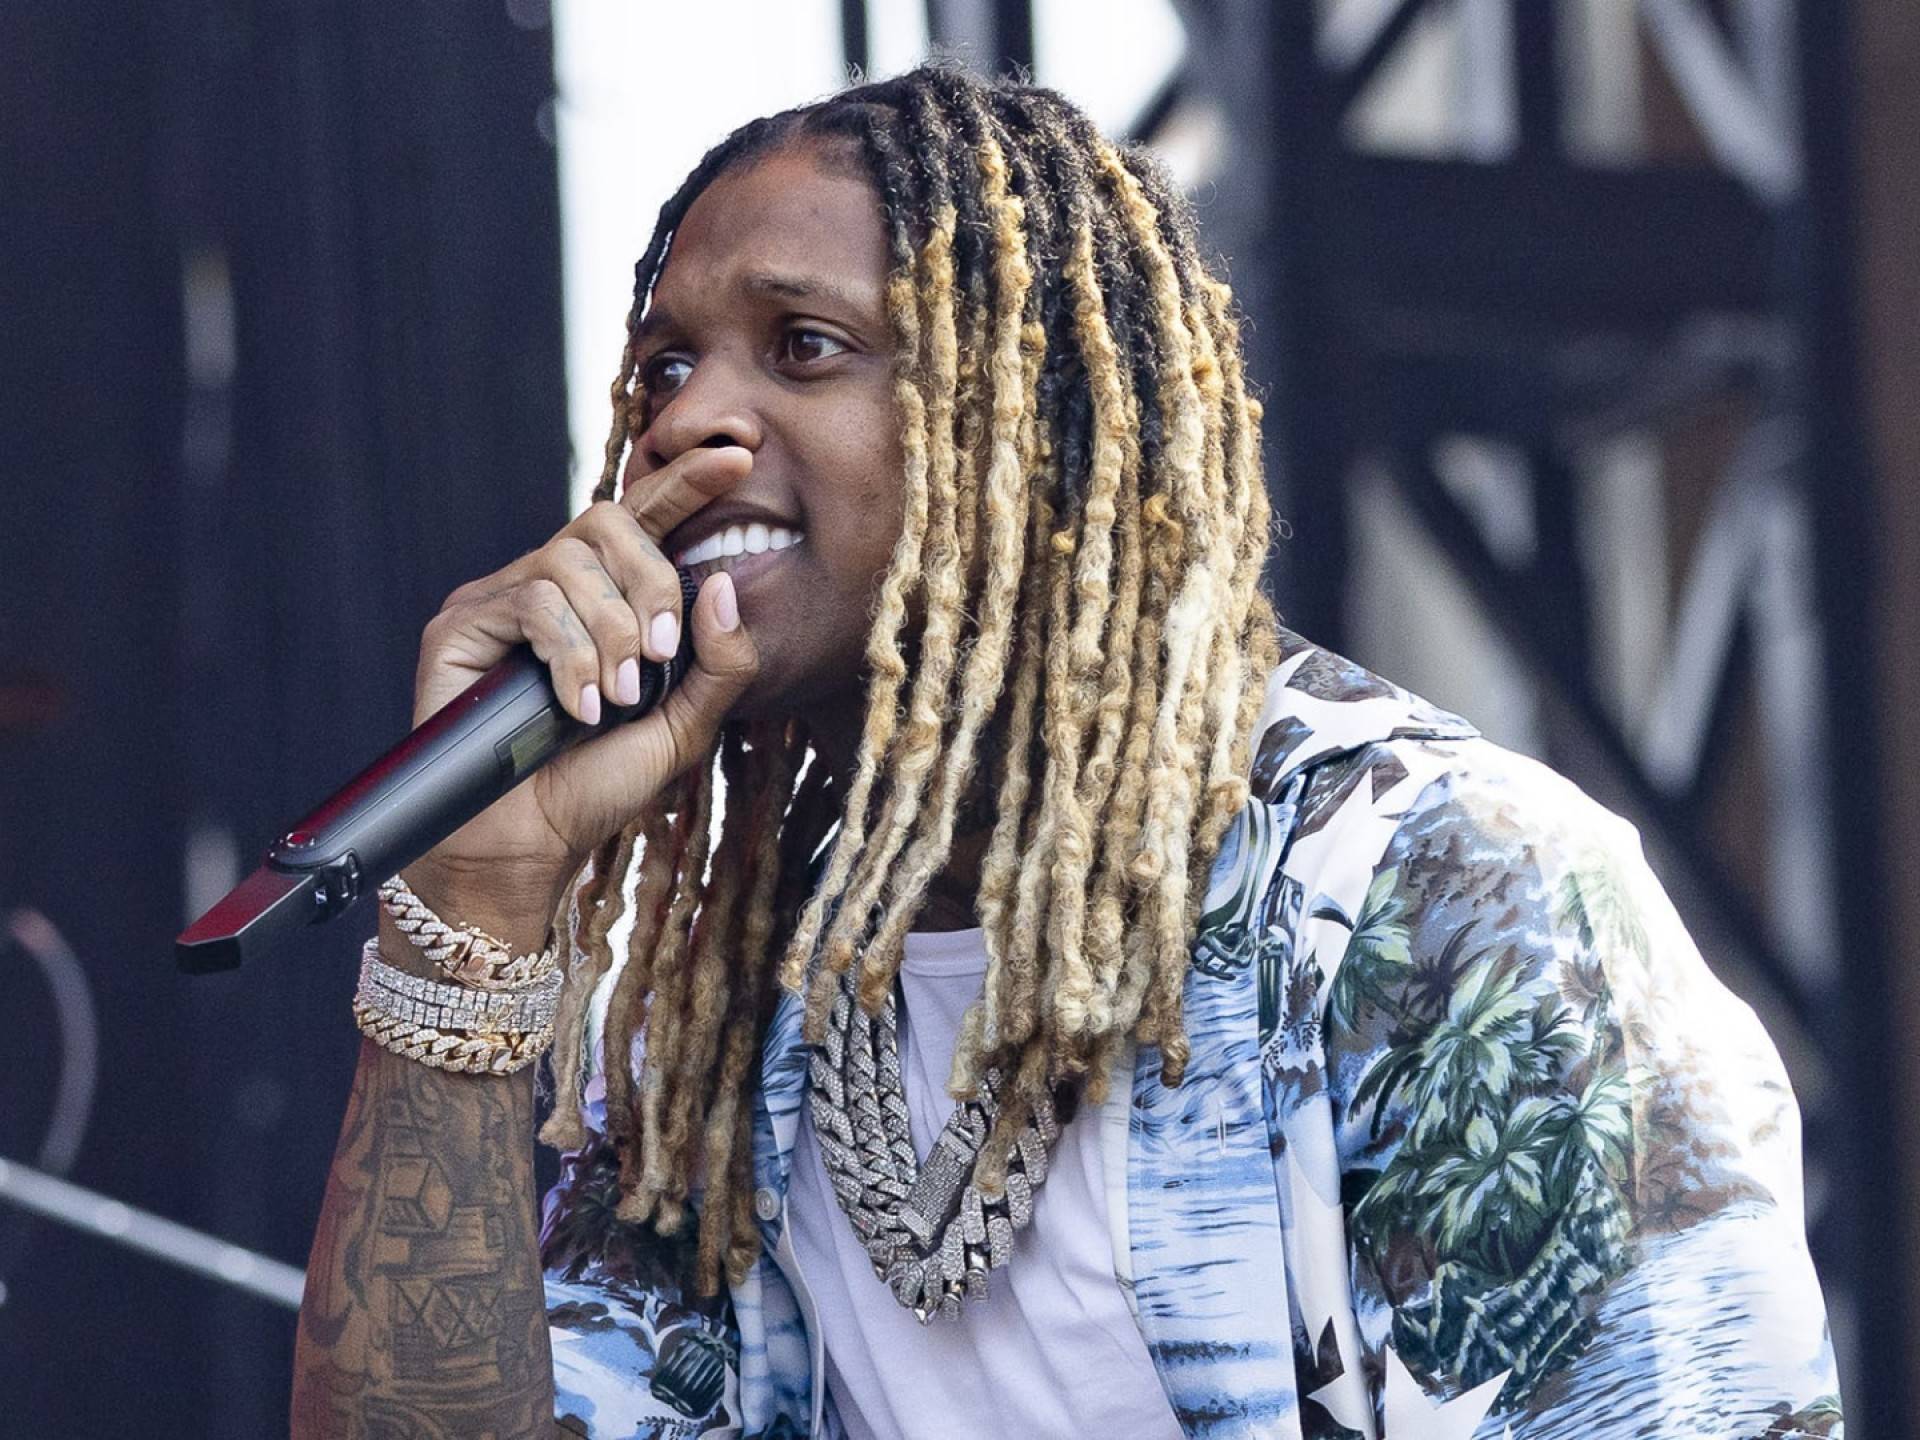 Growing out your hair - Image 1 from Hip Hop Awards 2022: Lil Durk’s ...